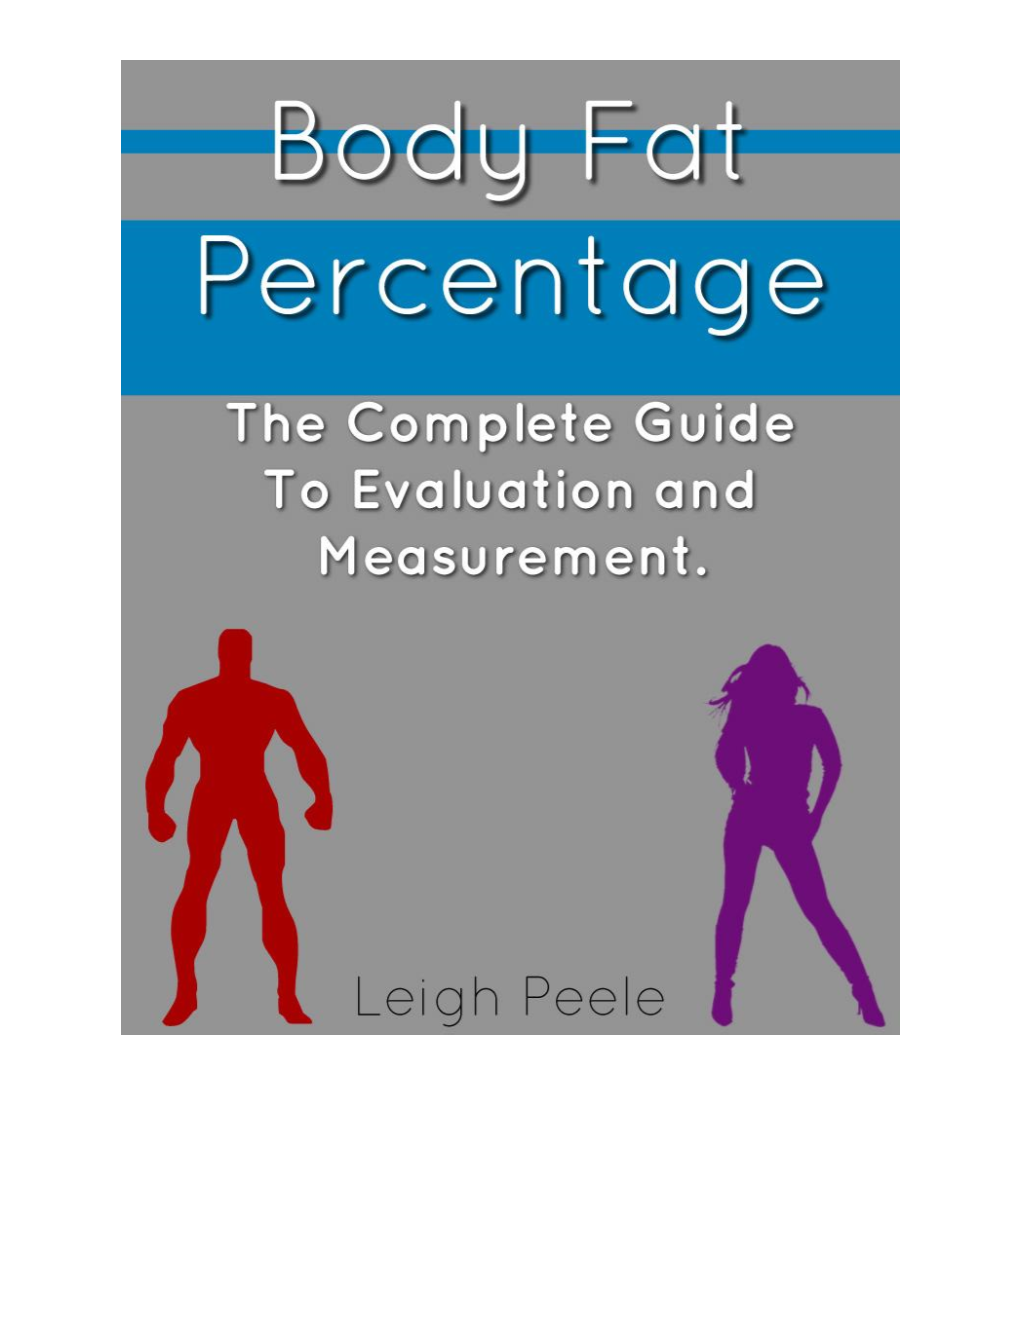 Body Fat Percentage: a Complete Guide to Evaluation and Measurement by Leigh Peele